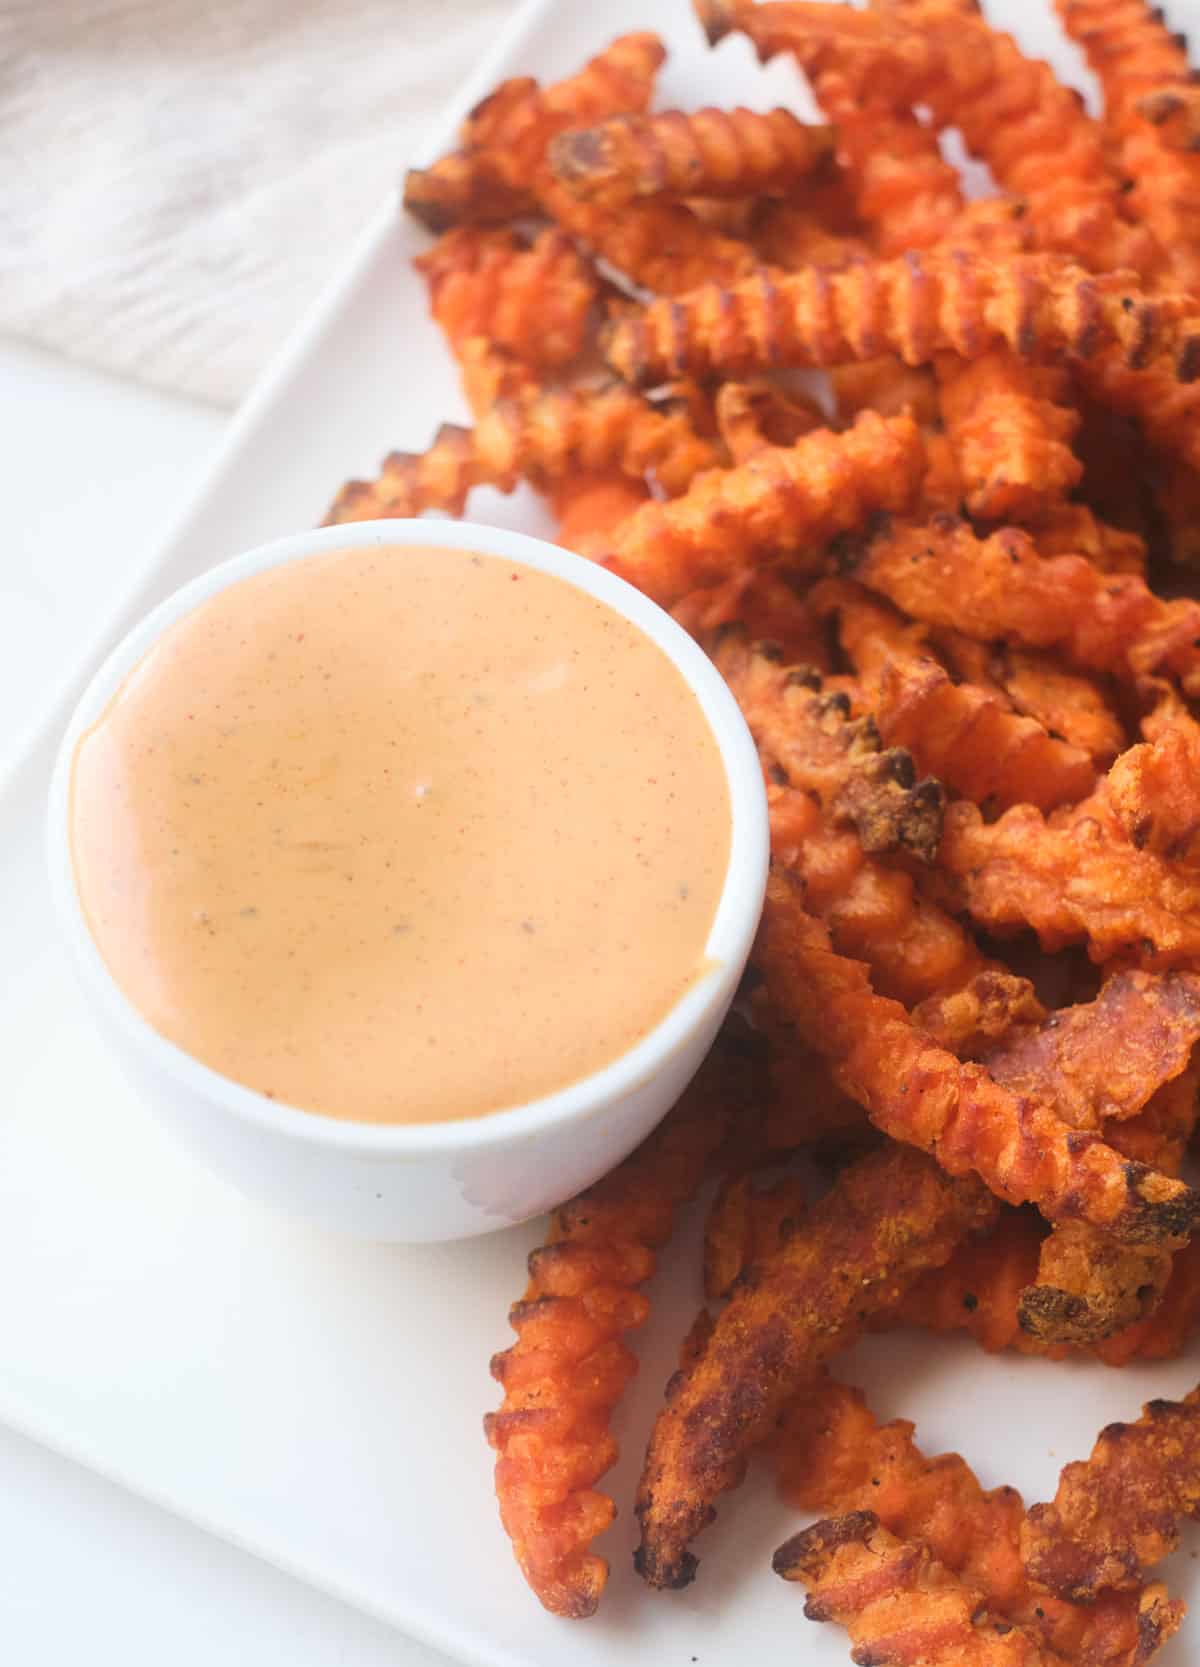 Sweet potato fries served with a creamy dipping sauce.